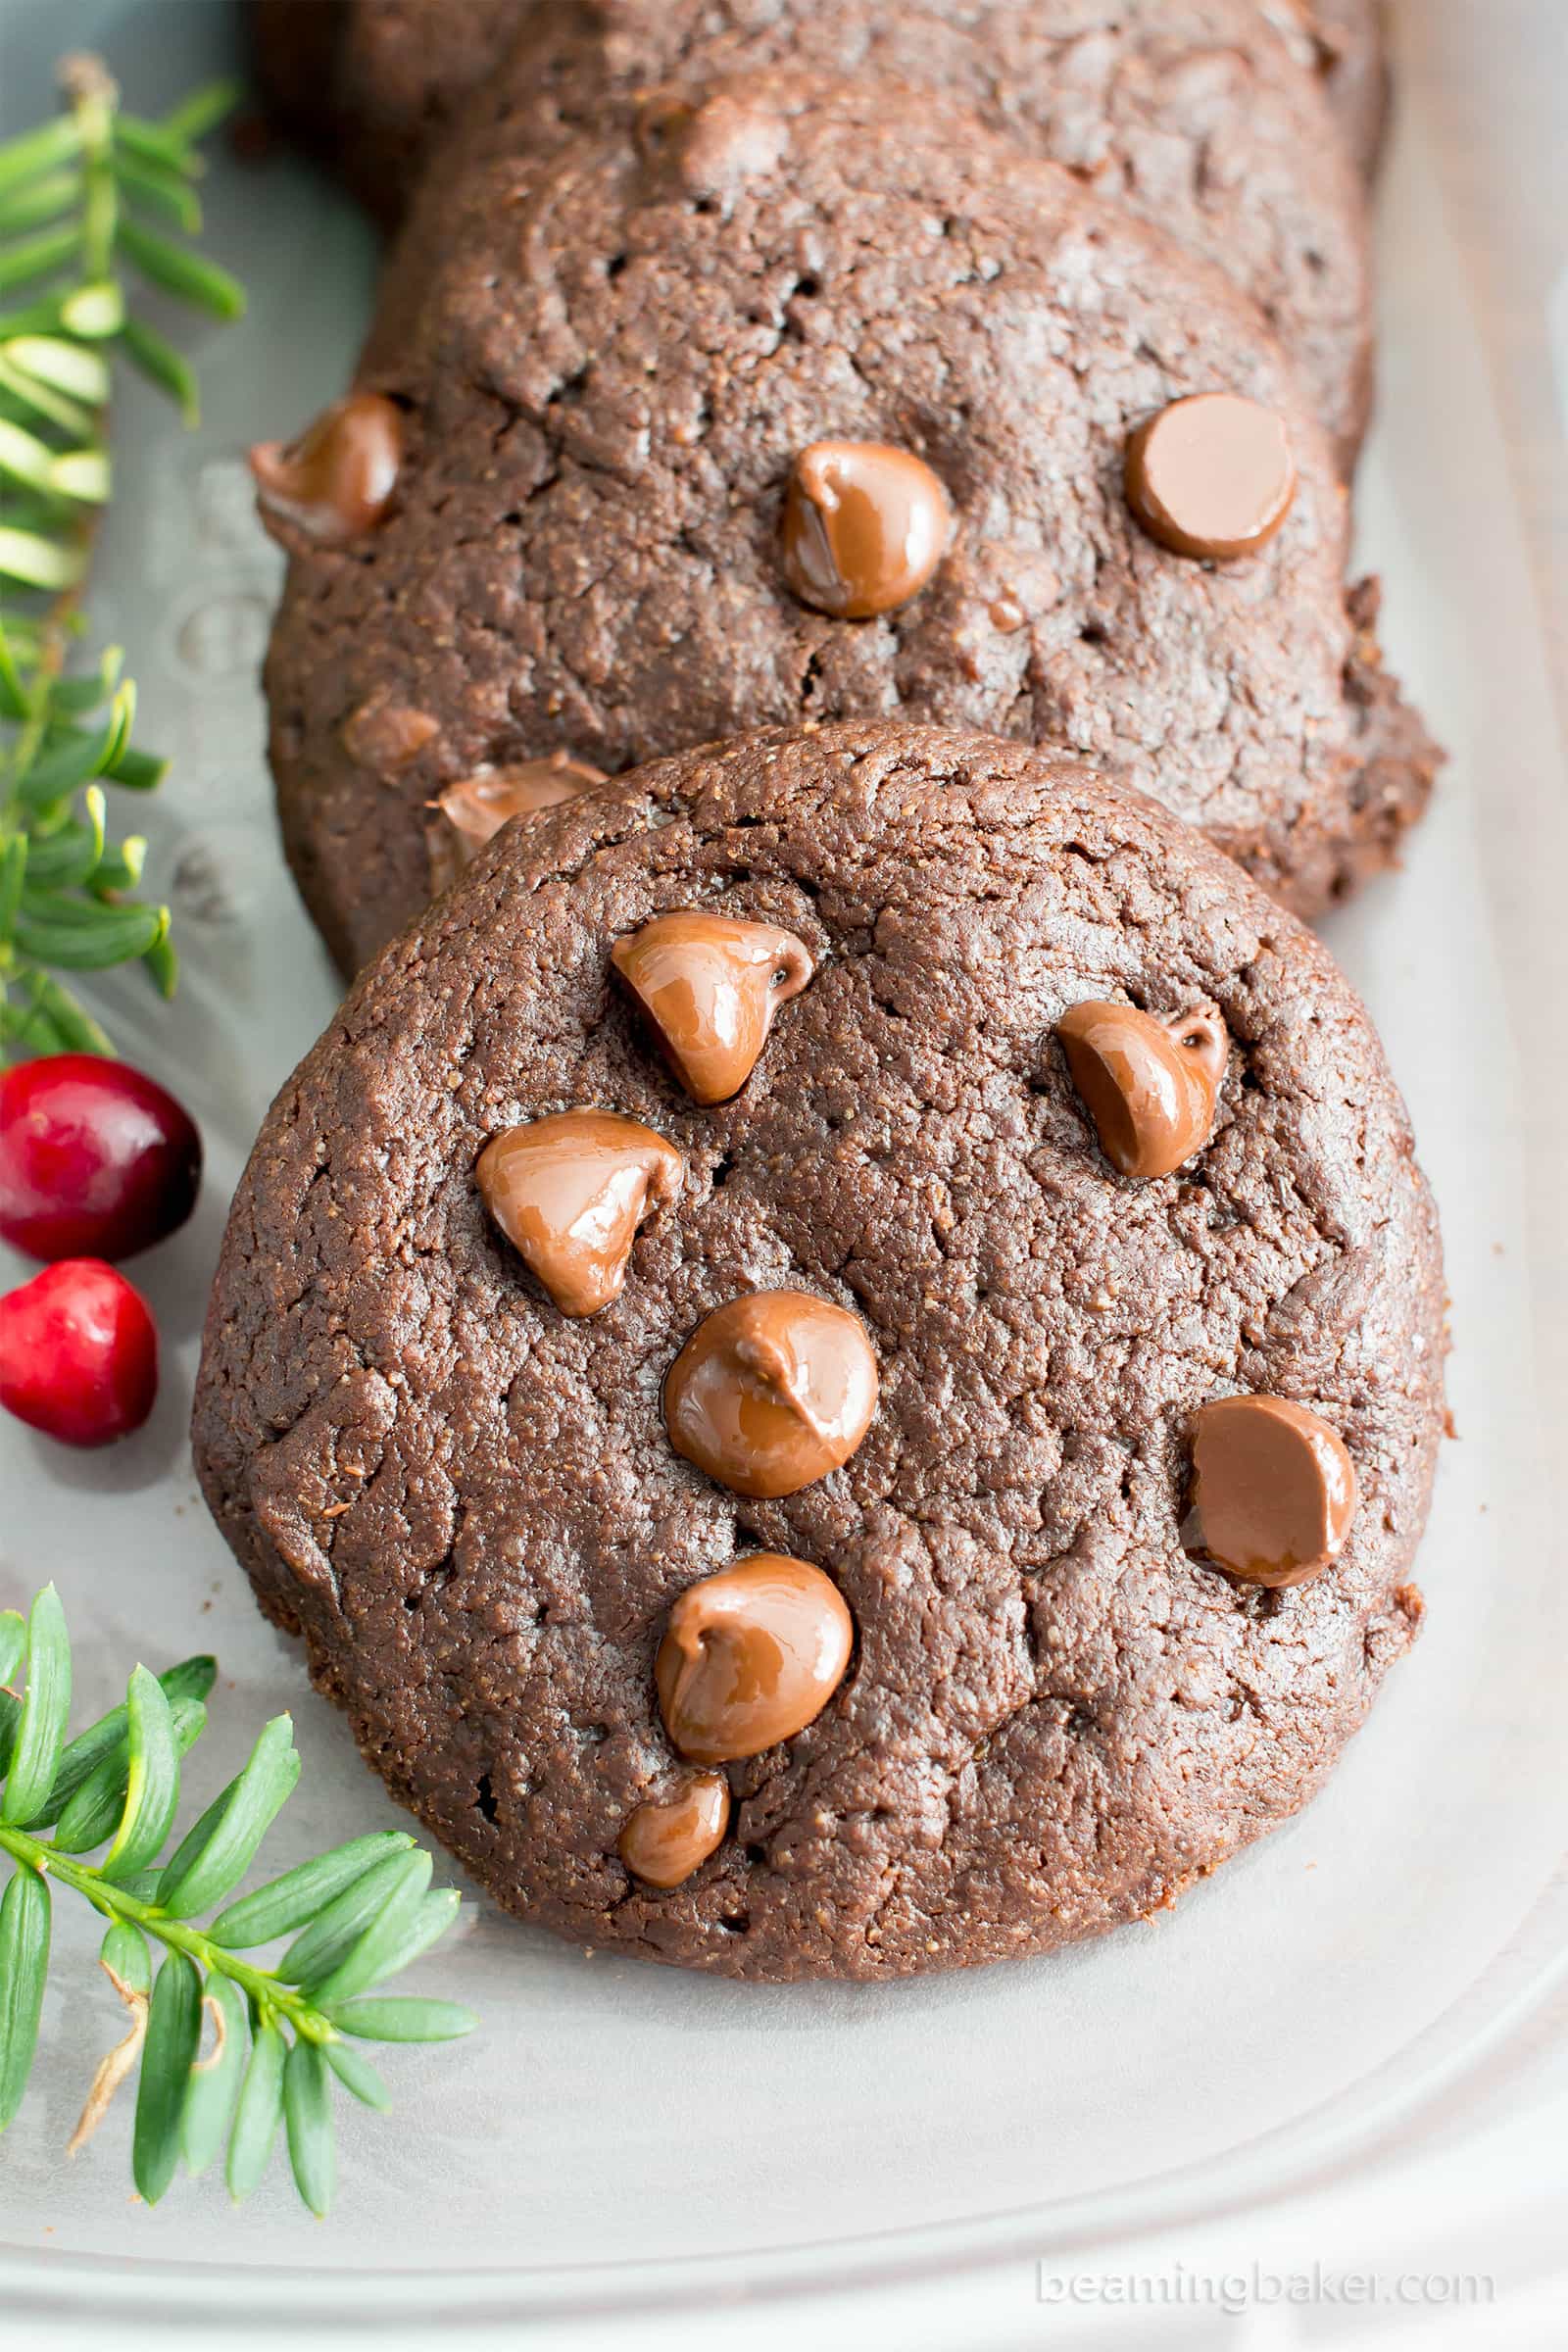 Gluten Free Peppermint Brownie Cookies Recipe (V, GF): a one bowl recipe for soft, decadent and fudgy brownie cookies (aka brookies) bursting with cool peppermint flavor and melted chocolate chips. #Vegan #GlutenFree #DairyFree #HealthyDessert #Holiday #Christmas | Recipe on BeamingBaker.com